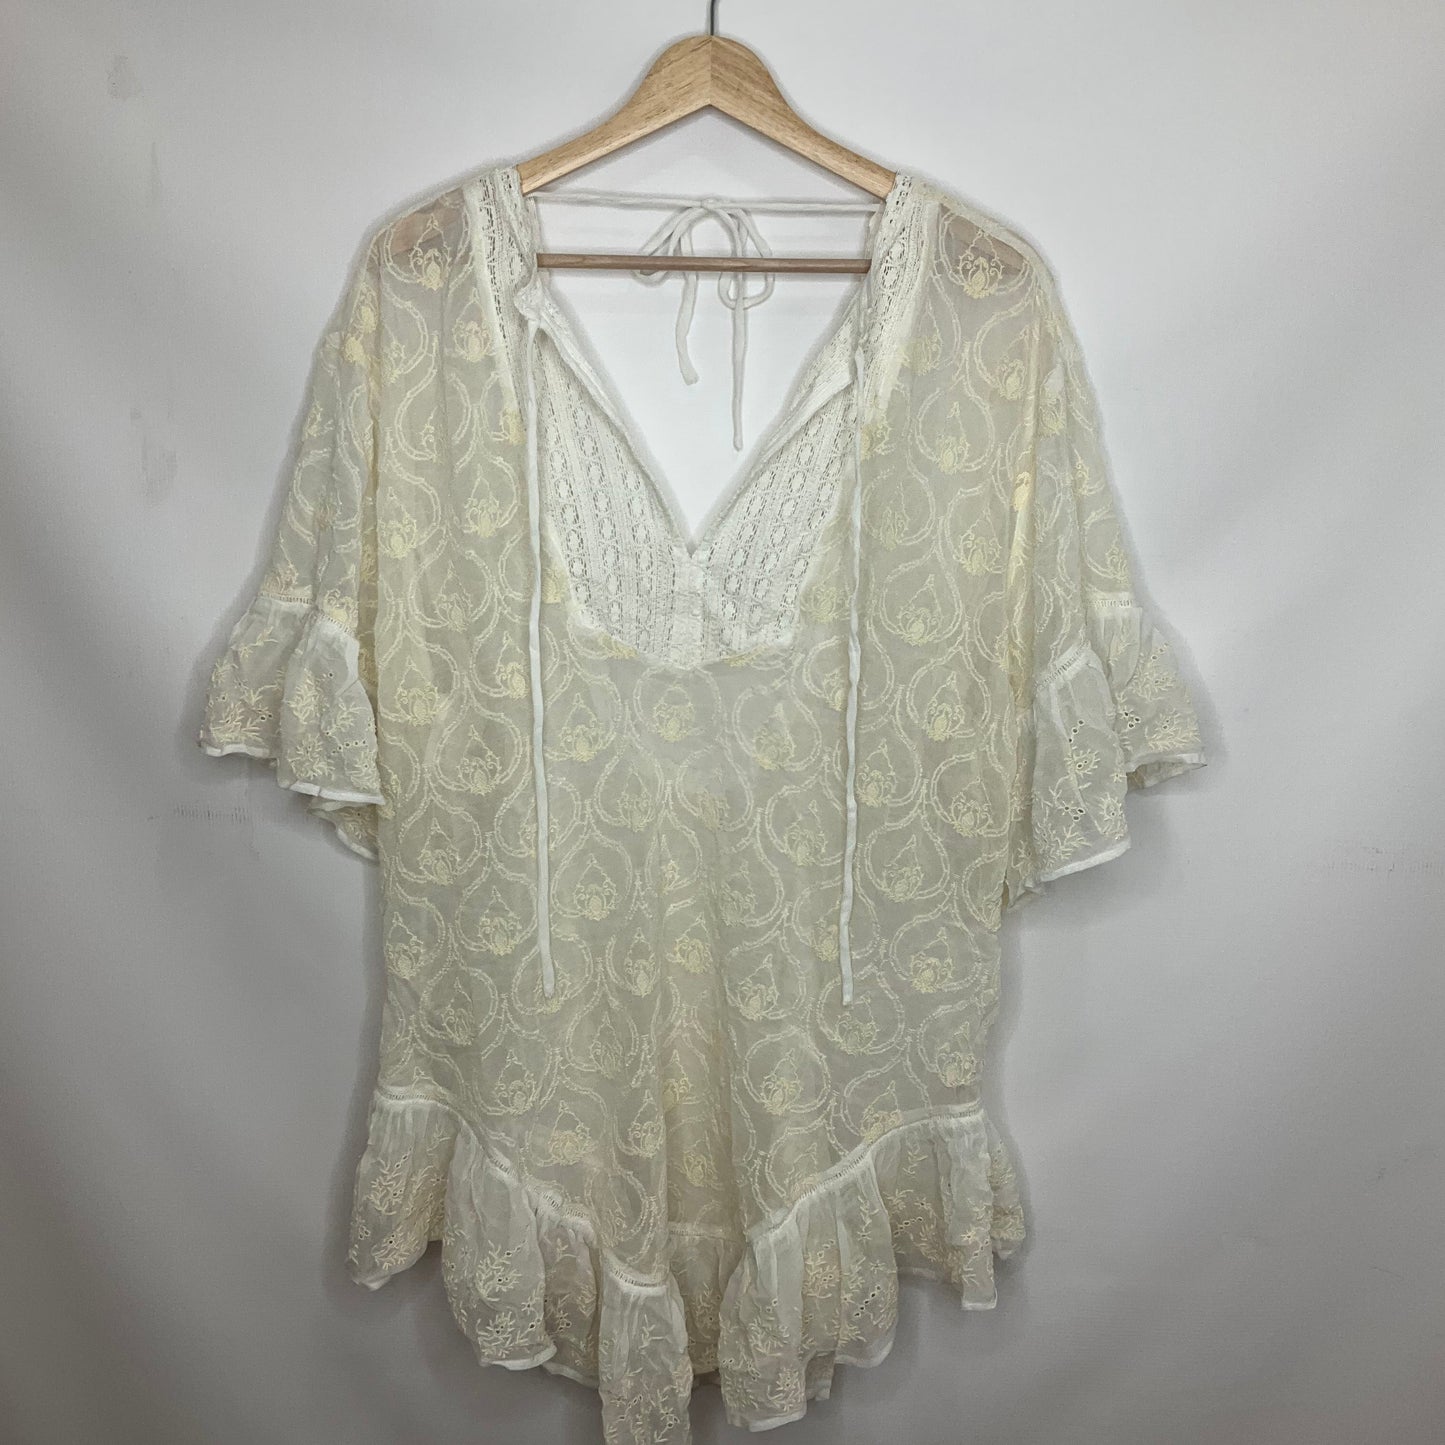 White Top Short Sleeve Anthropologie, Size S